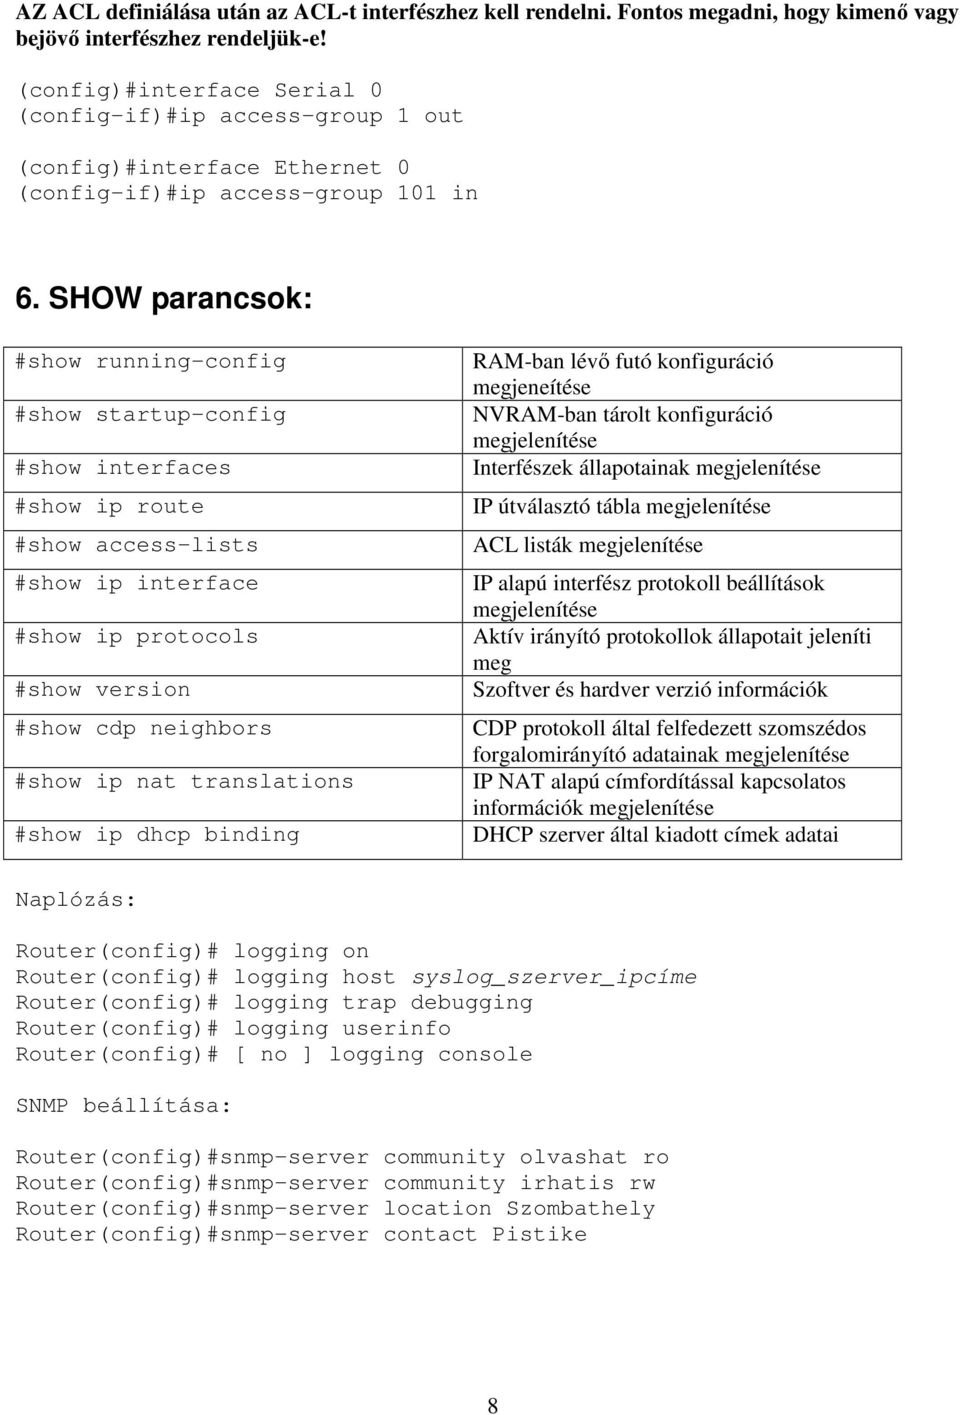 SHOW parancsok: #show running-config #show startup-config #show interfaces #show ip route #show access-lists #show ip interface #show ip protocols #show version #show cdp neighbors #show ip nat